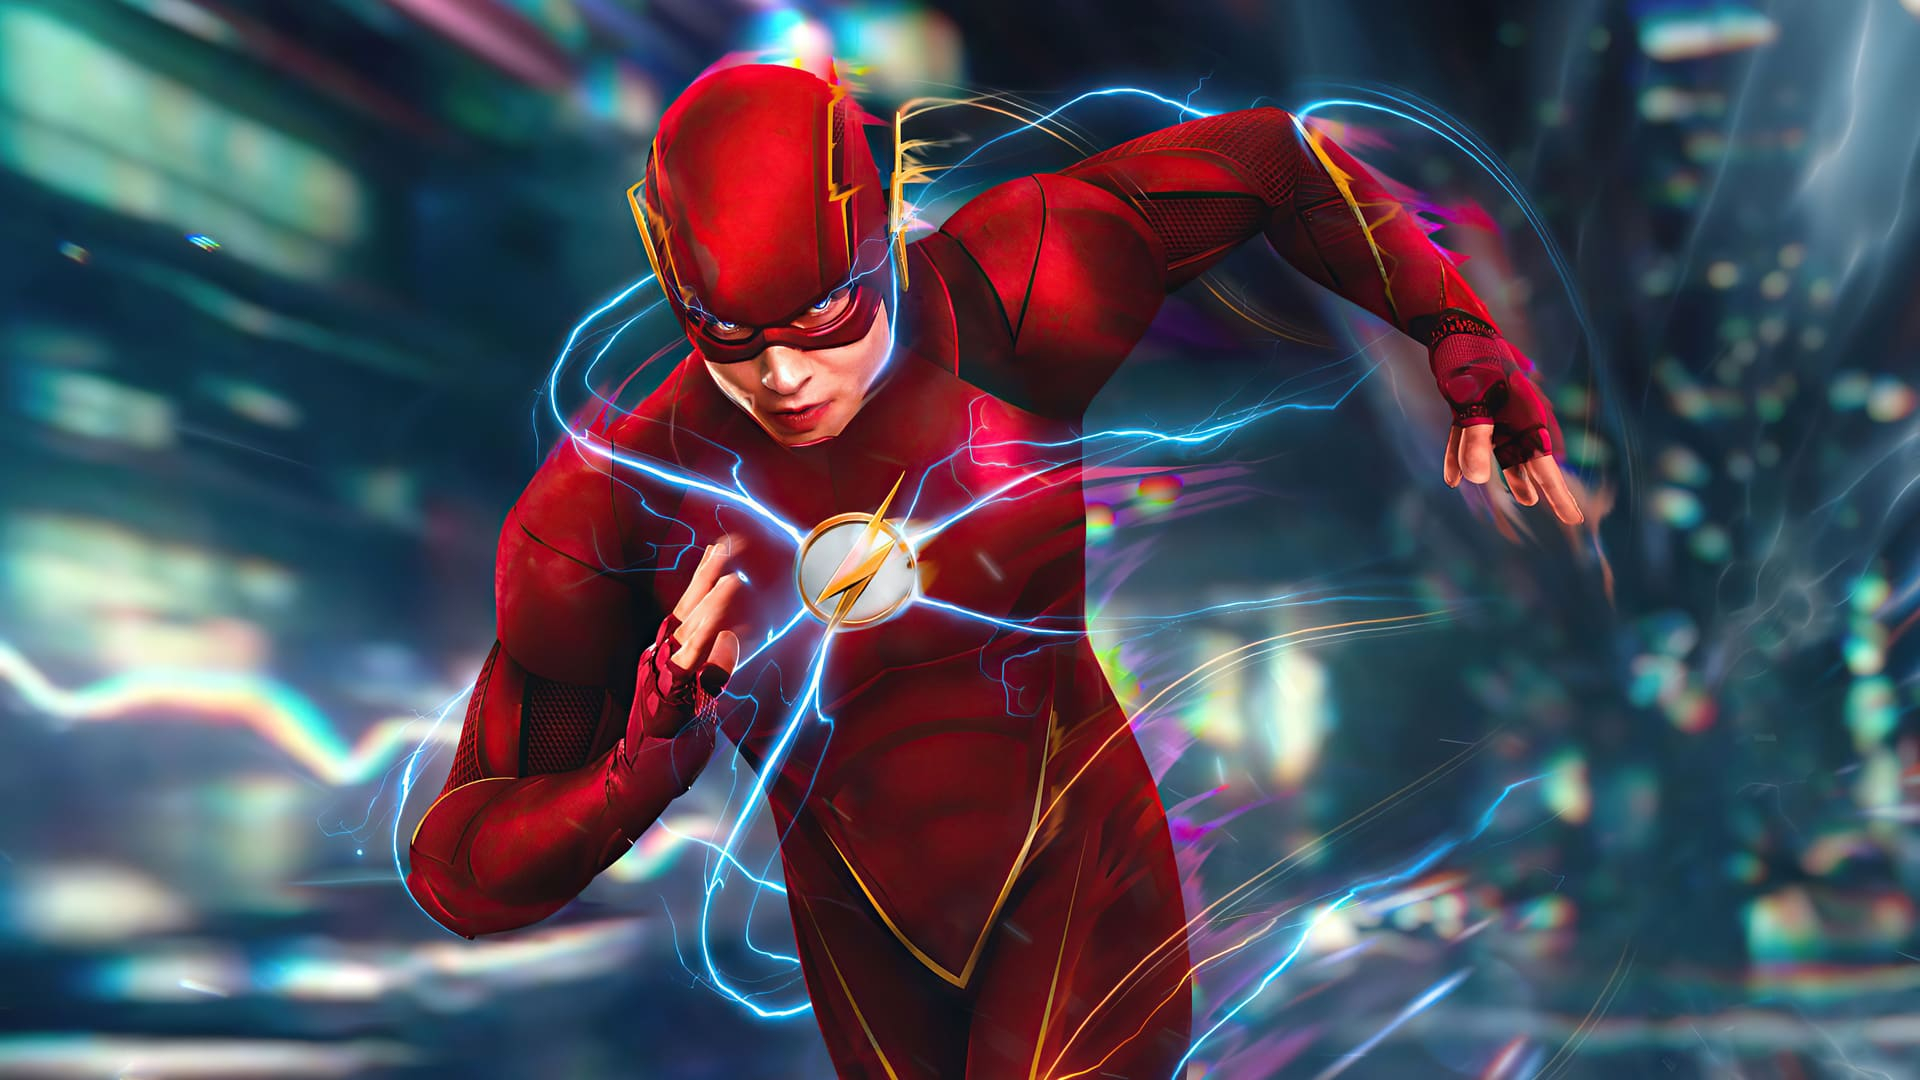 1920x1080 The Flash Wallpapers Top Best The Flash Backgrounds Download